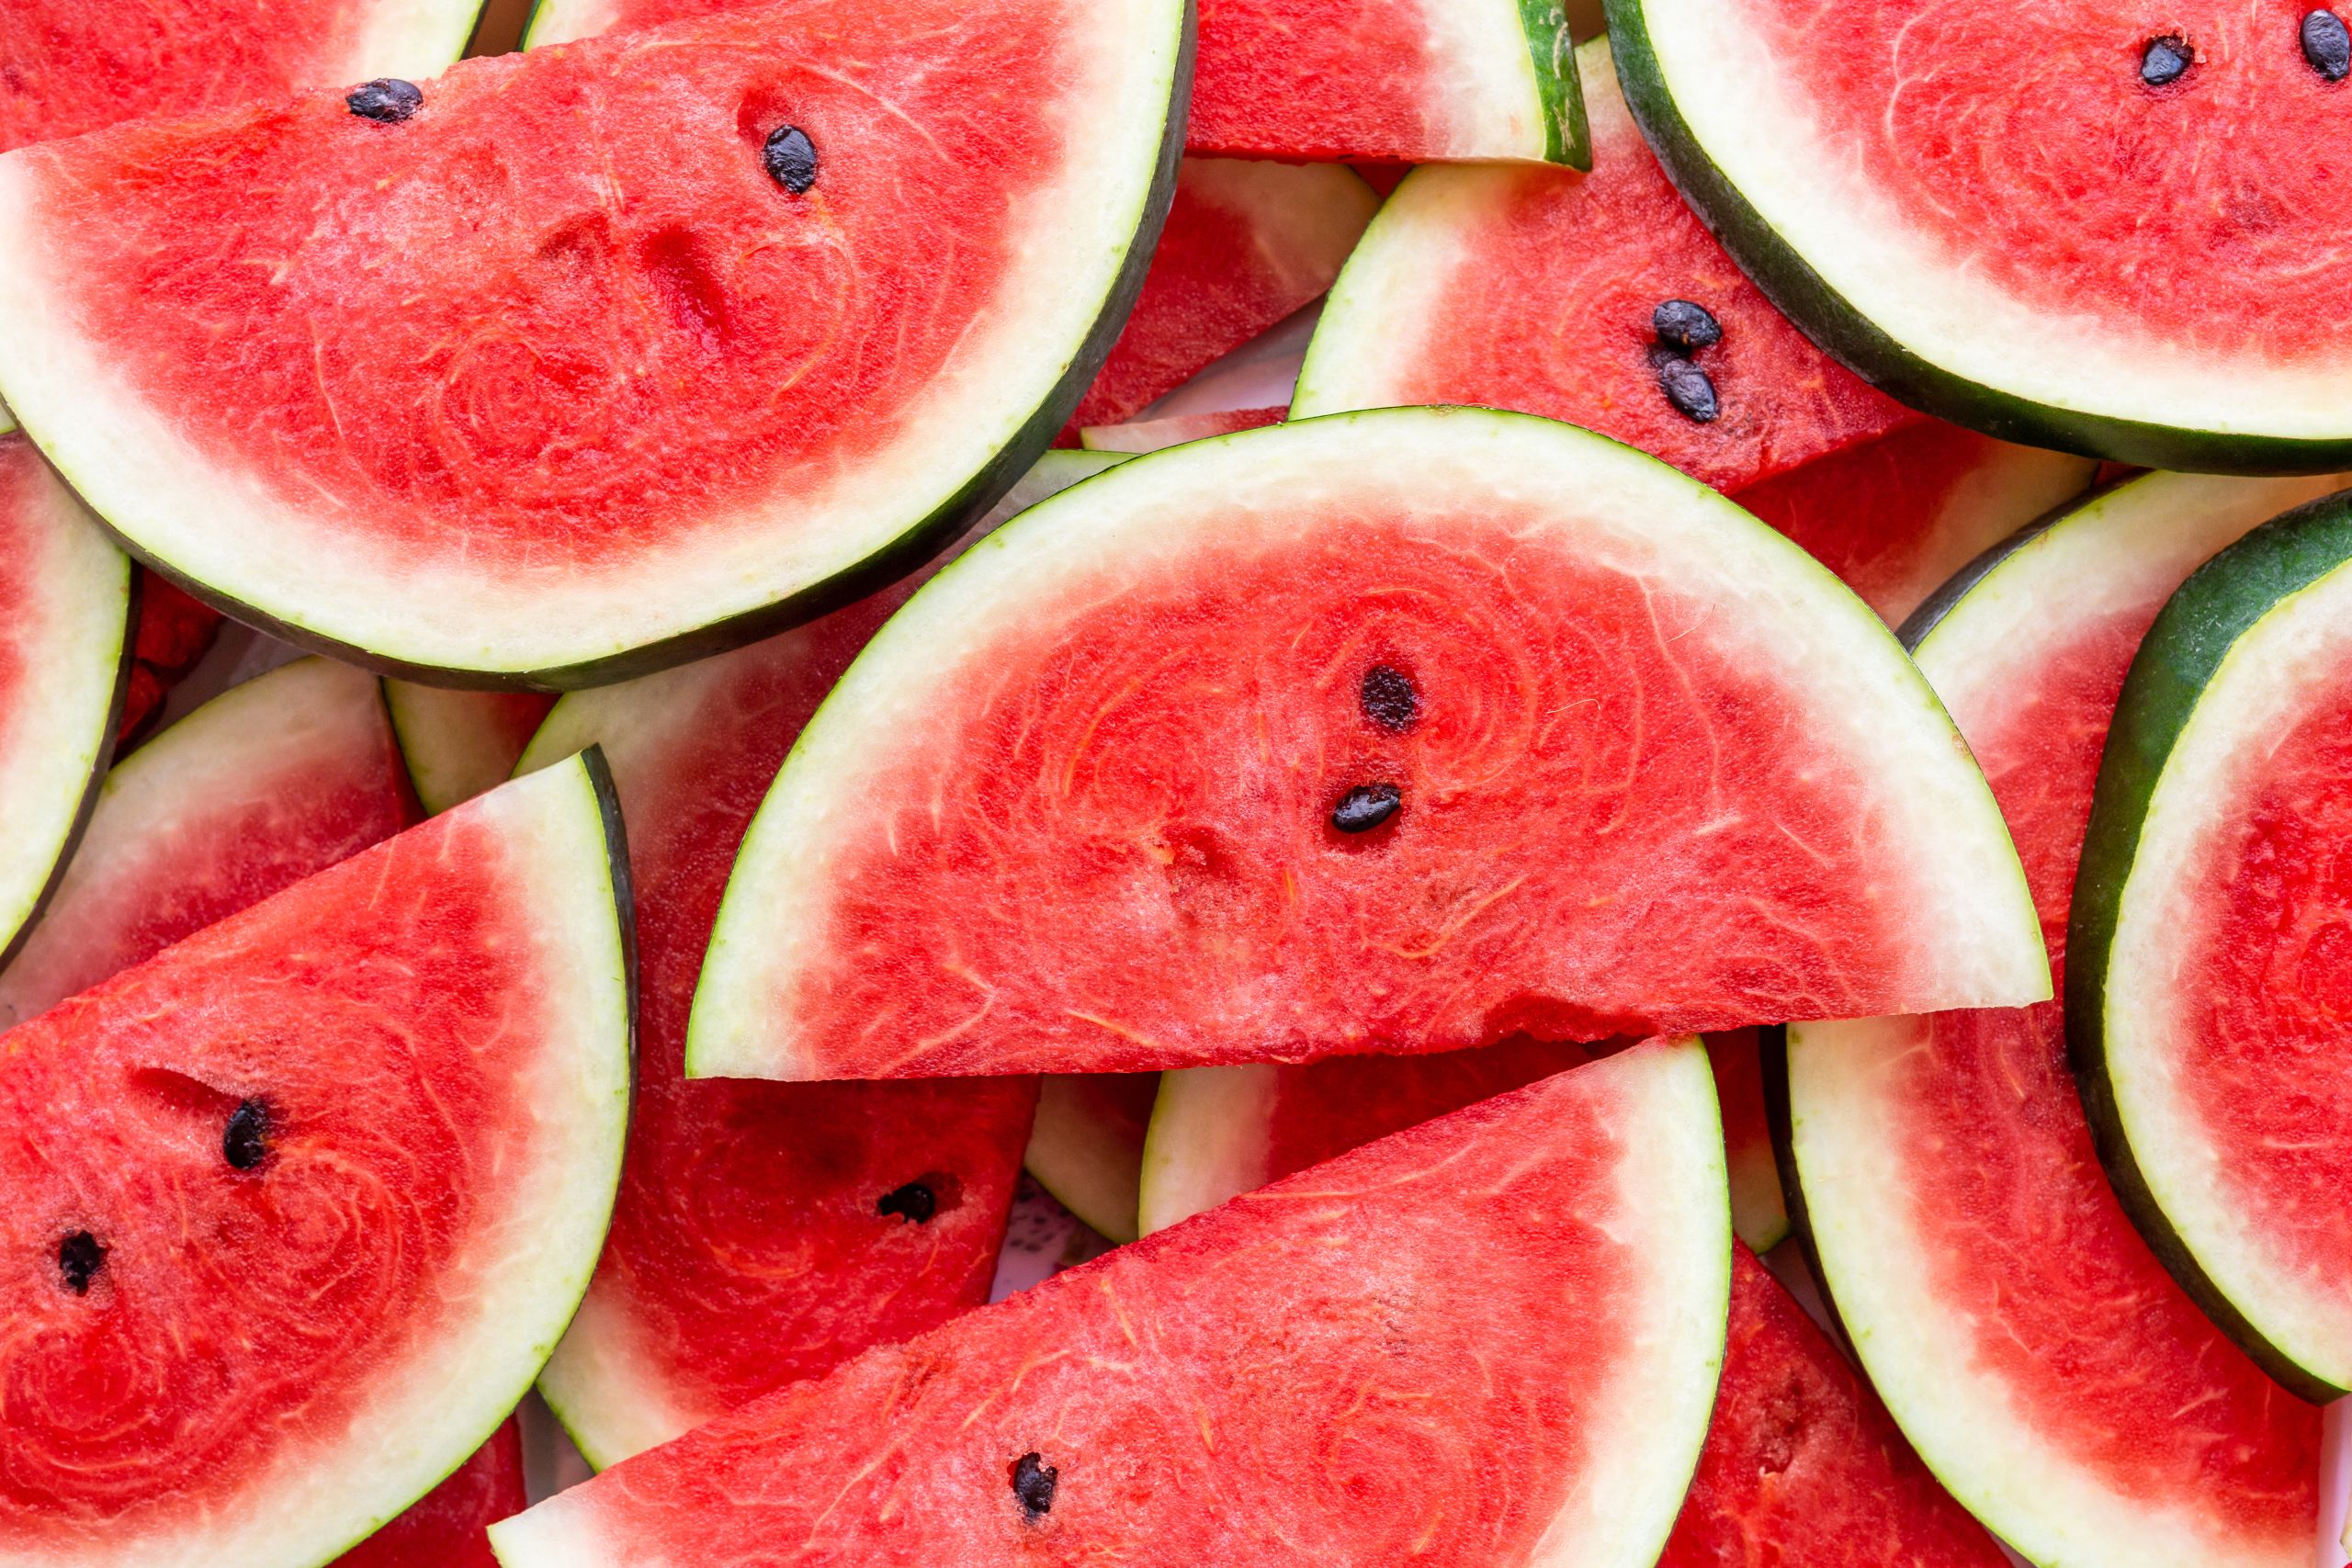 Banner image of watermelon